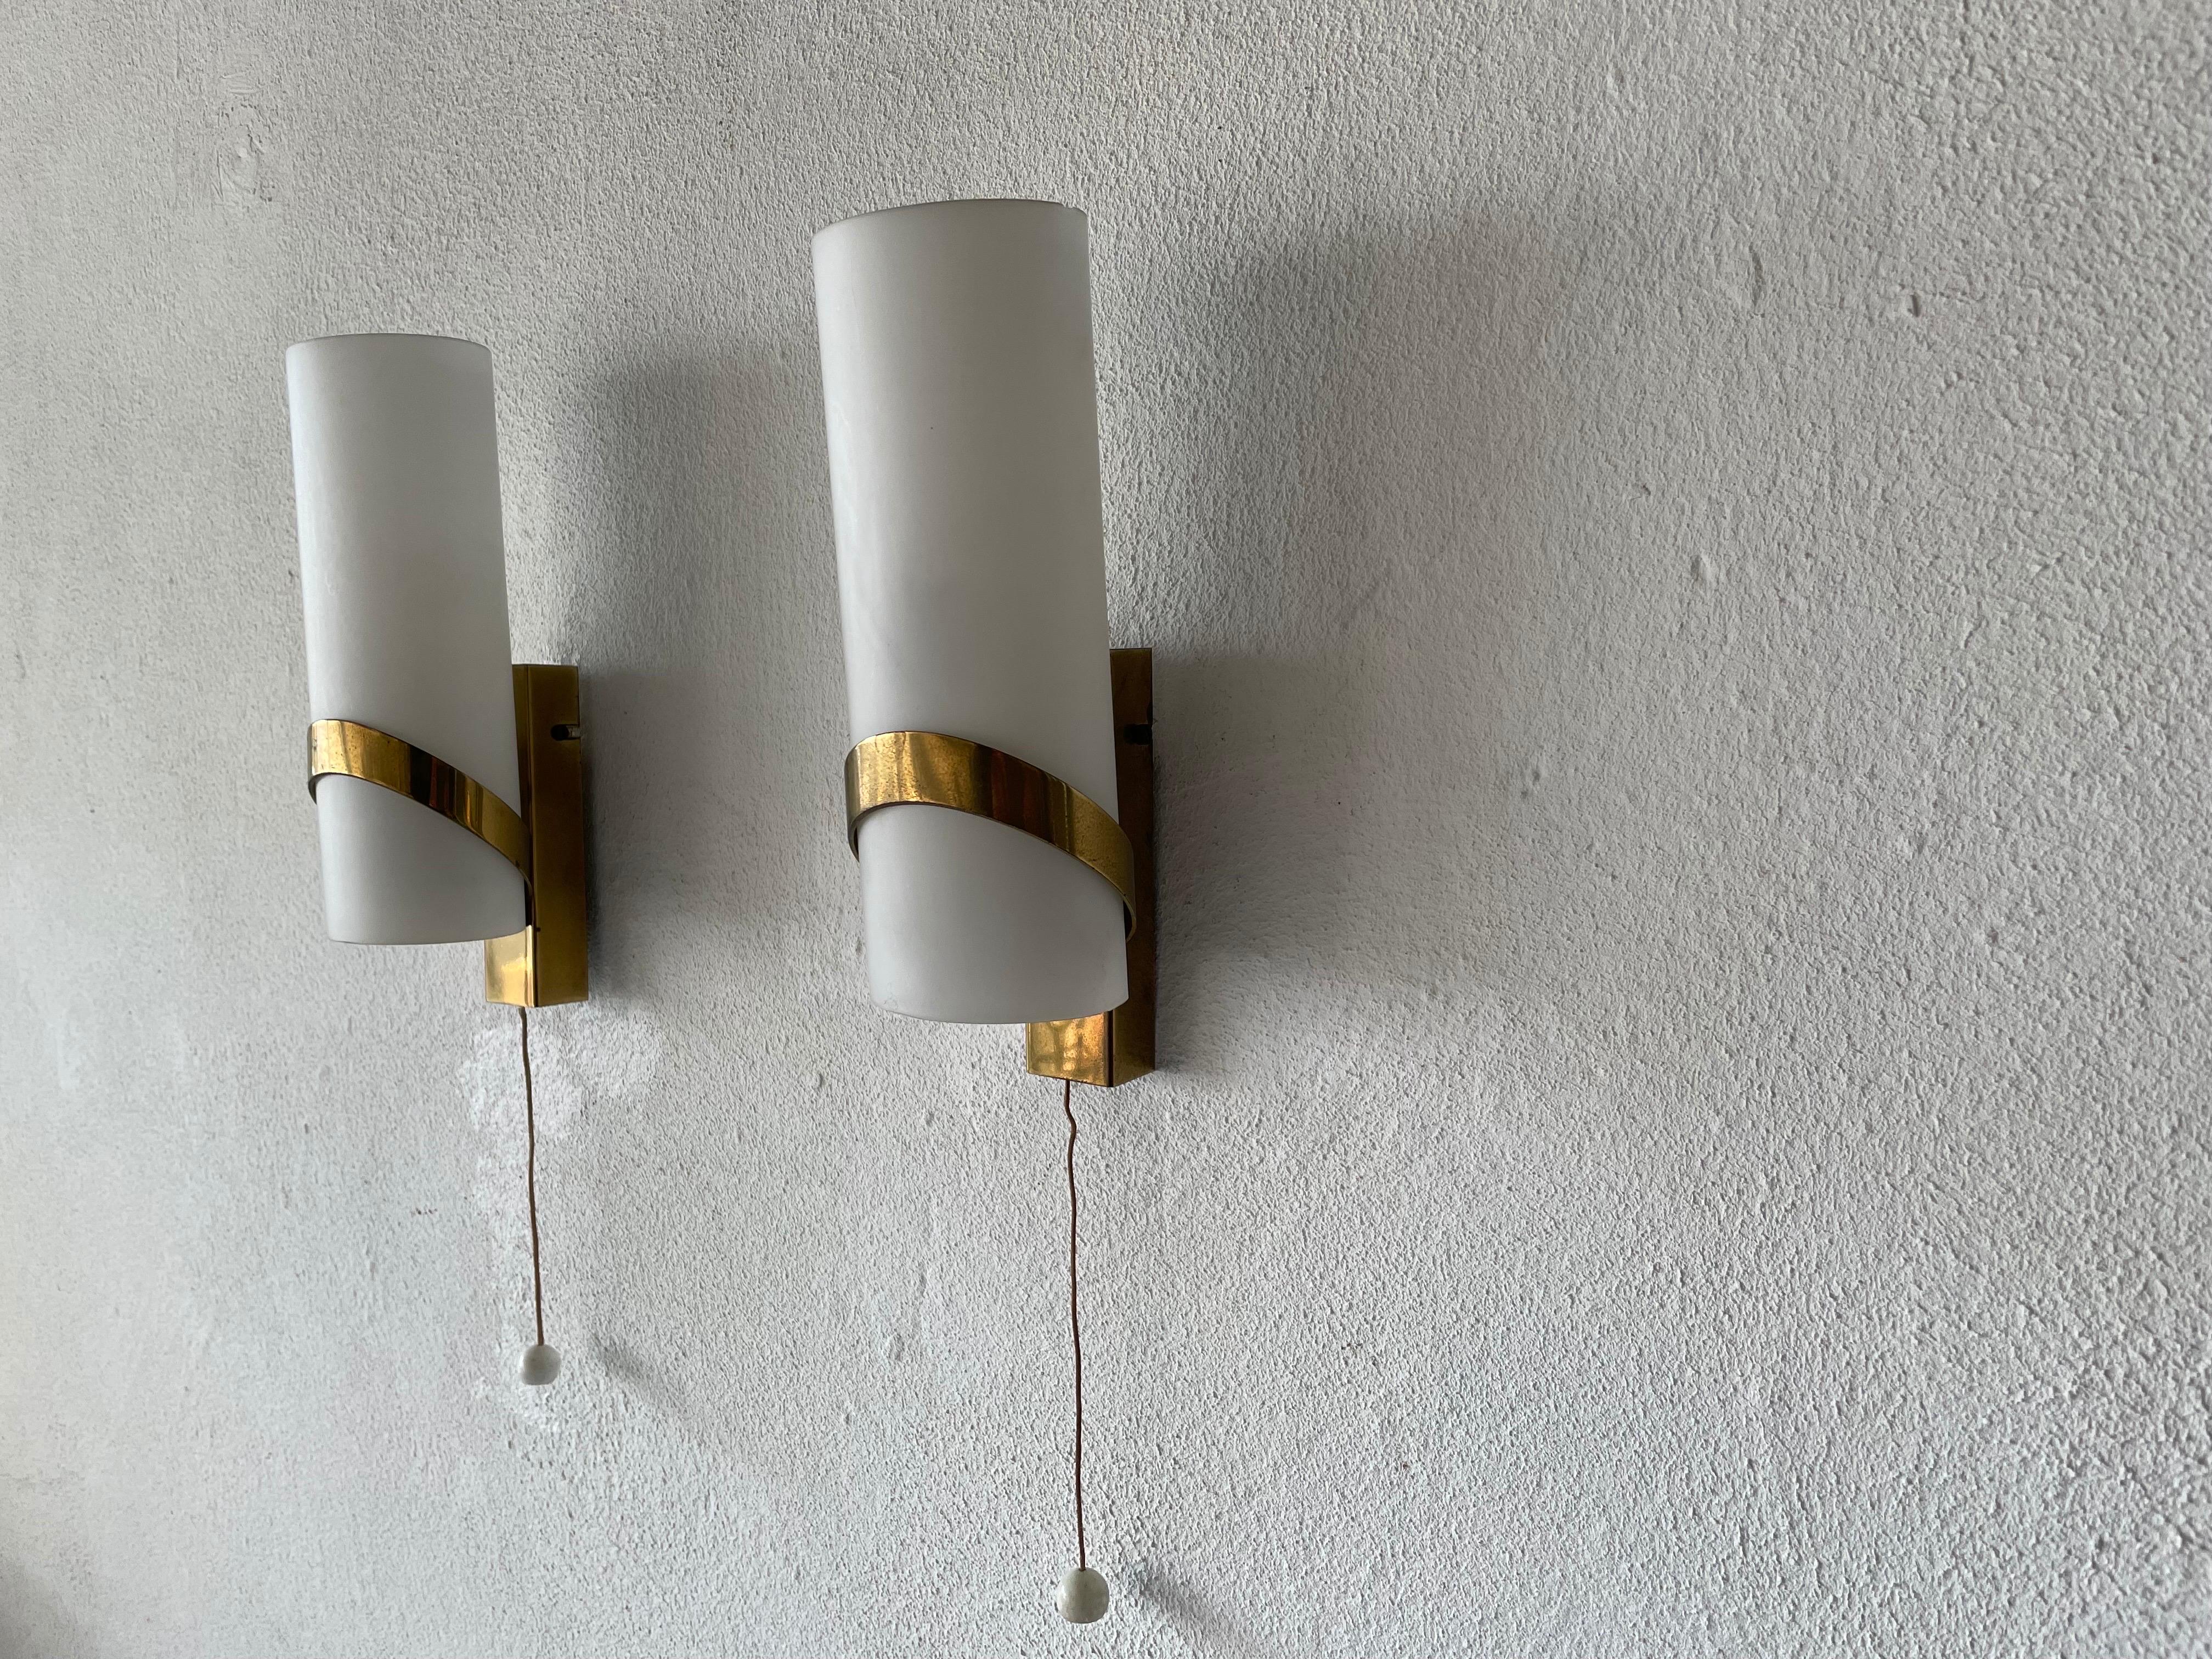 Mid-century pair of sconces by Stilnovo, 1950s, Italy

Very elegant and Minimalist wall lamps

Brushed satin glass diffusers and brass.

Lamp is in very good condition.
These lamps works with E14 standard light bulbs. 
Wired and suitable to